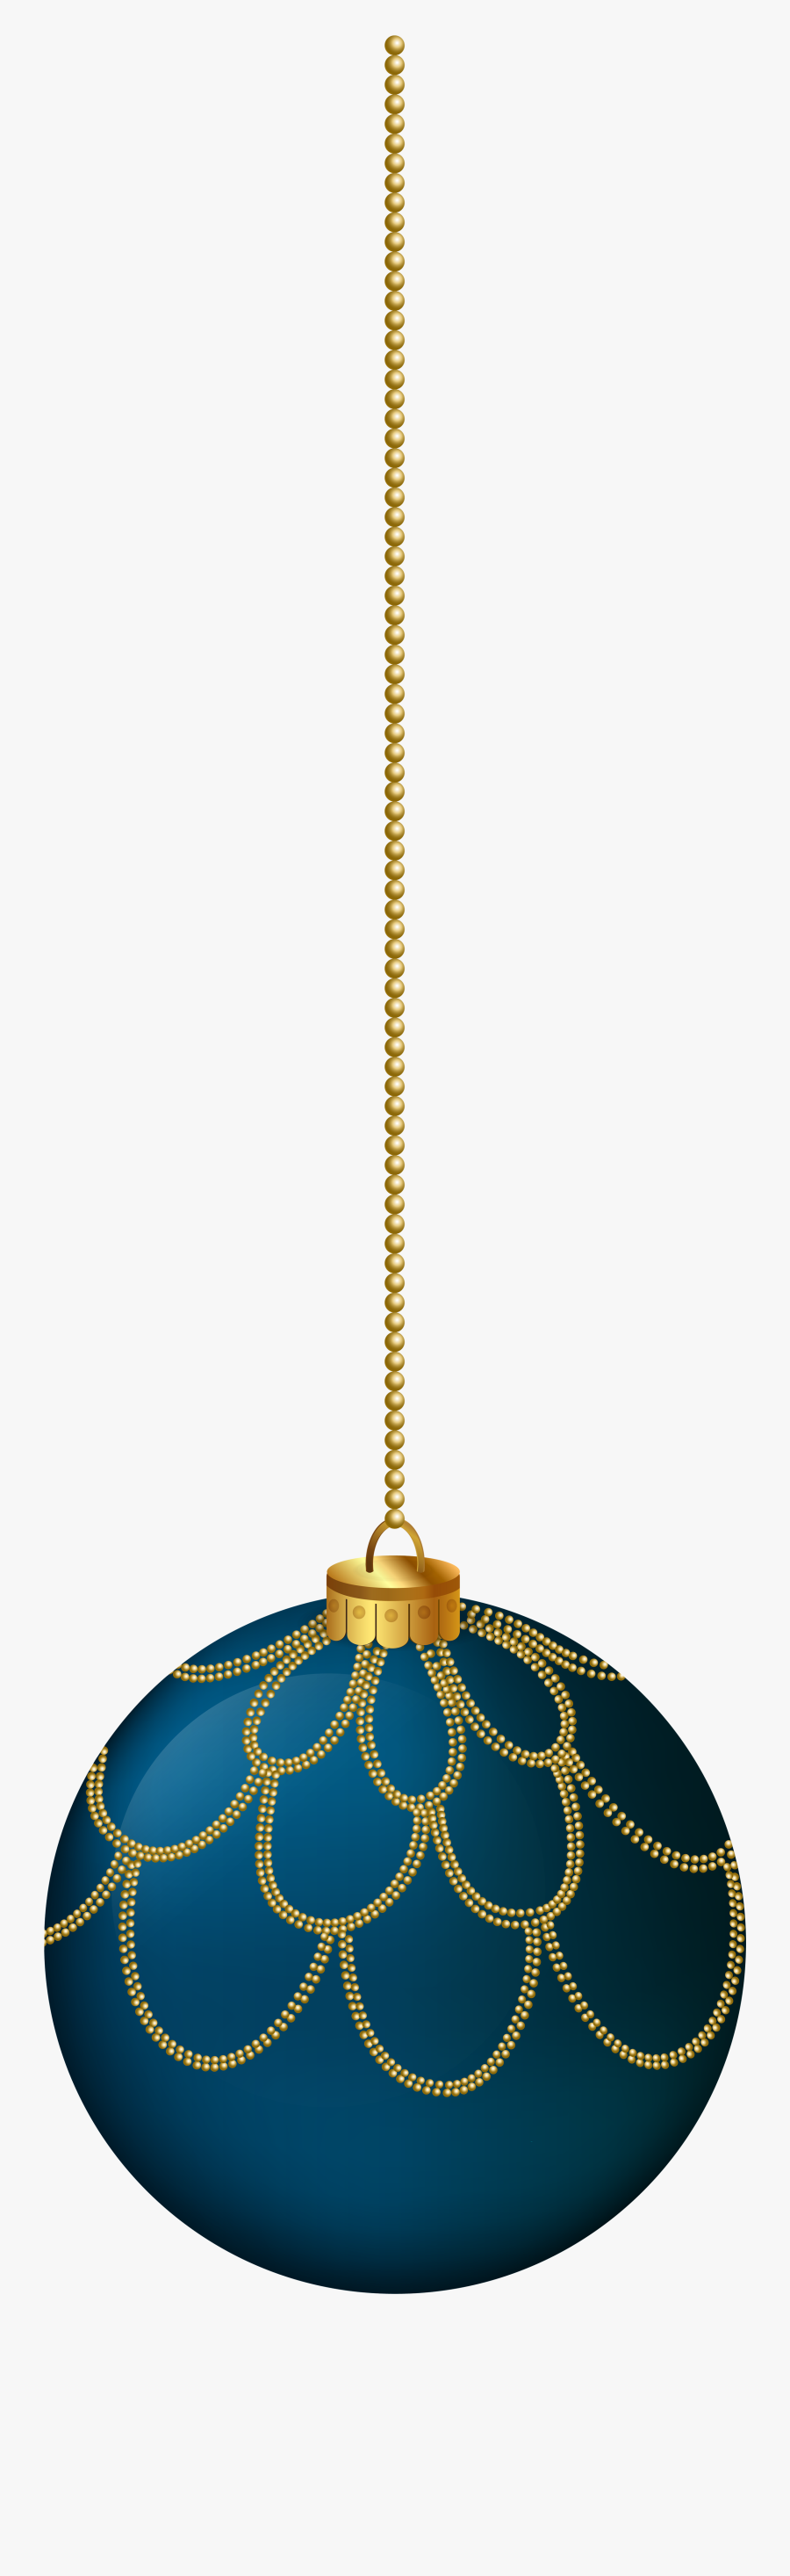 Hanging Rope Png, Transparent Clipart